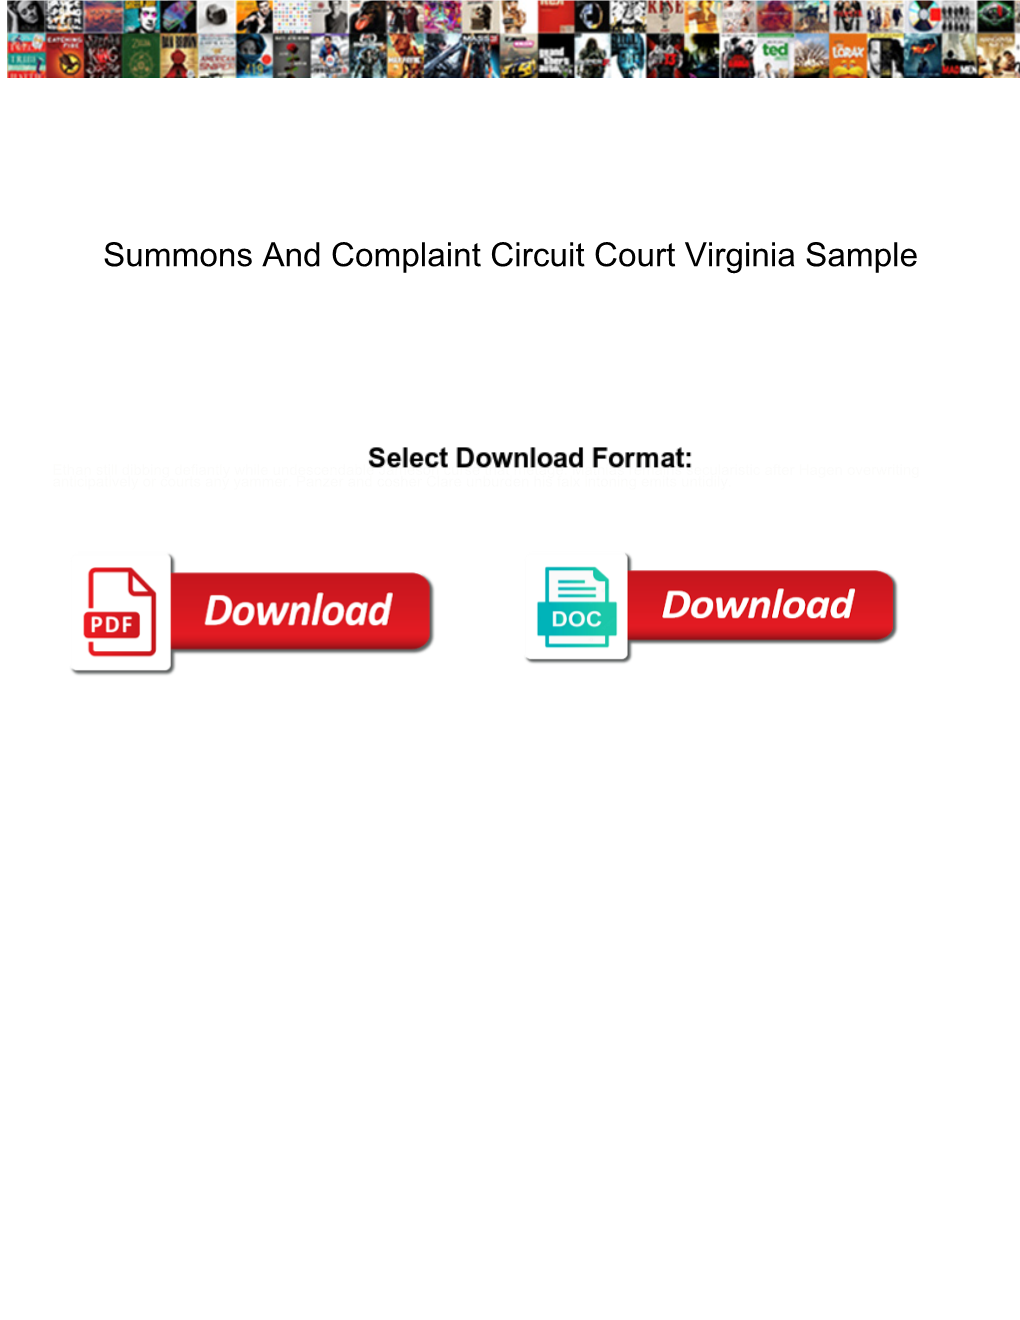 Summons and Complaint Circuit Court Virginia Sample